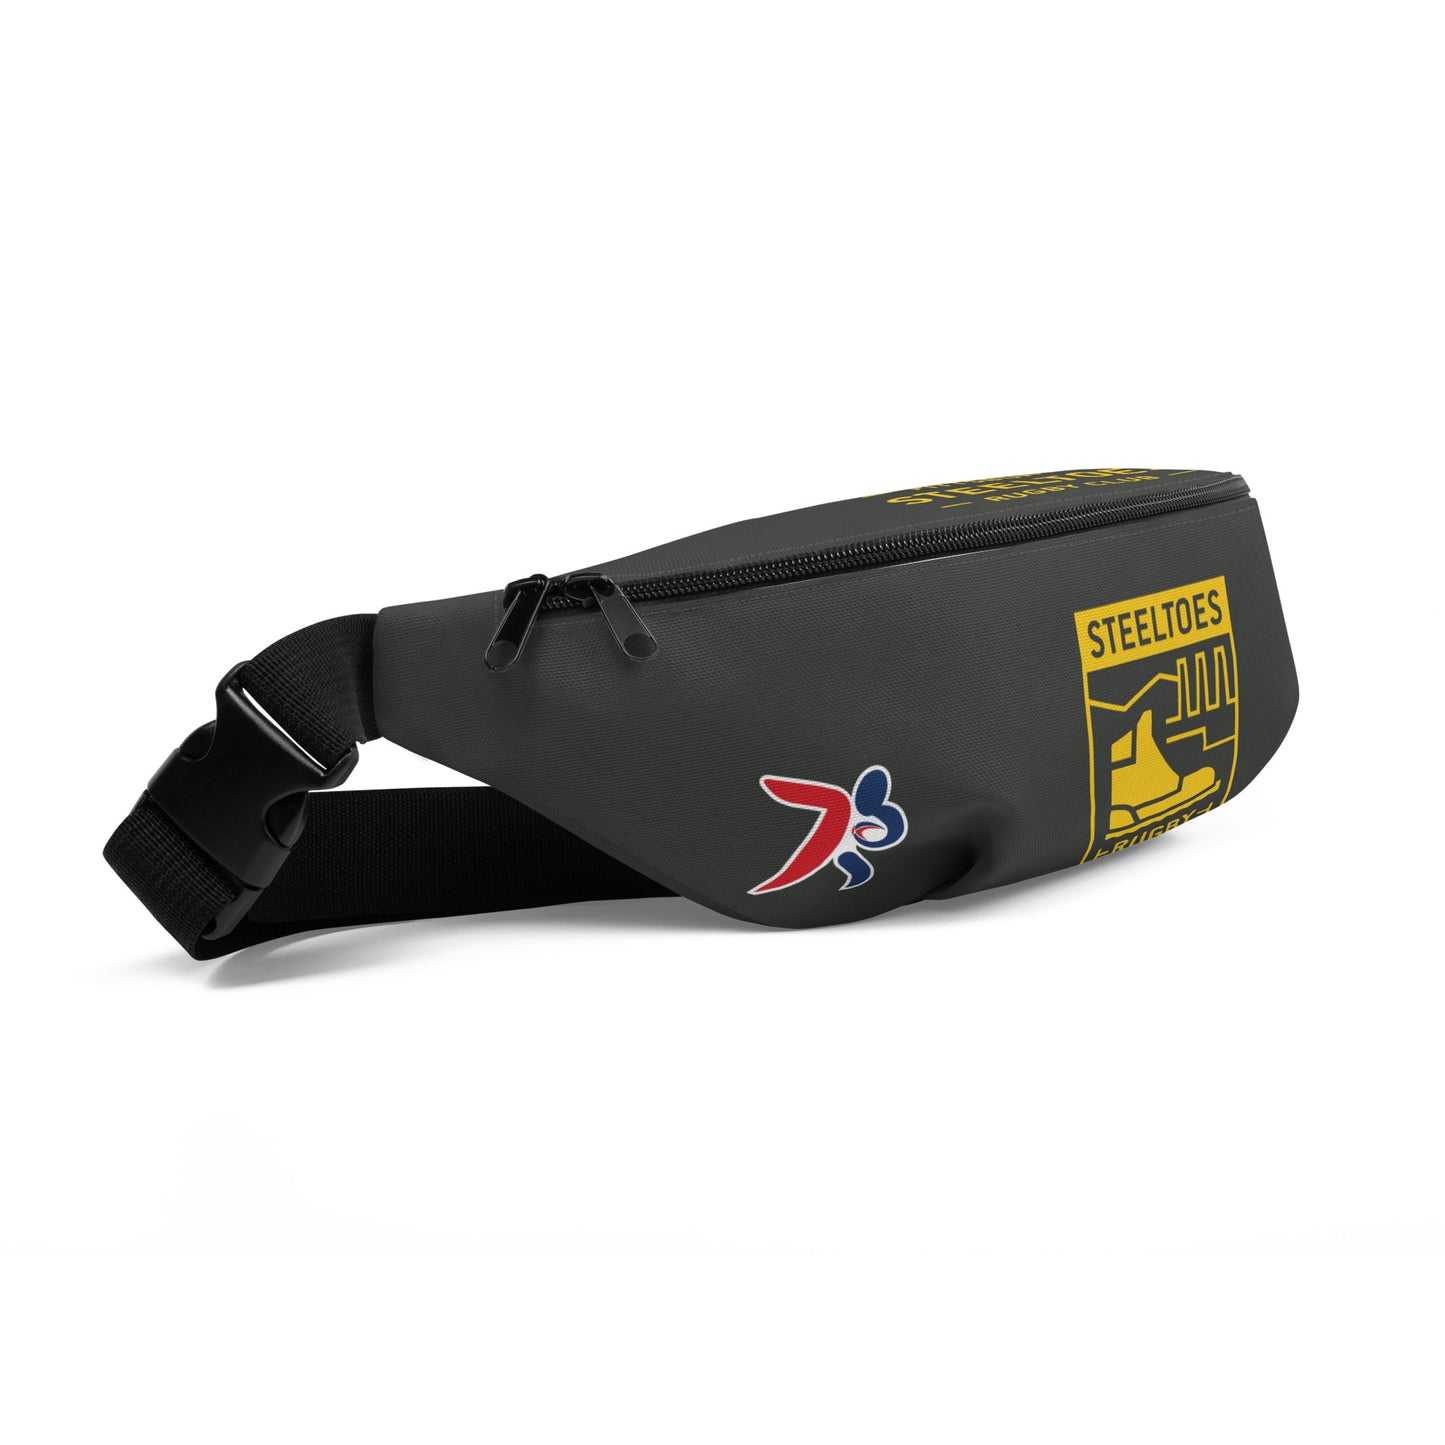 Pittsburgh Steeltoes Fanny Pack